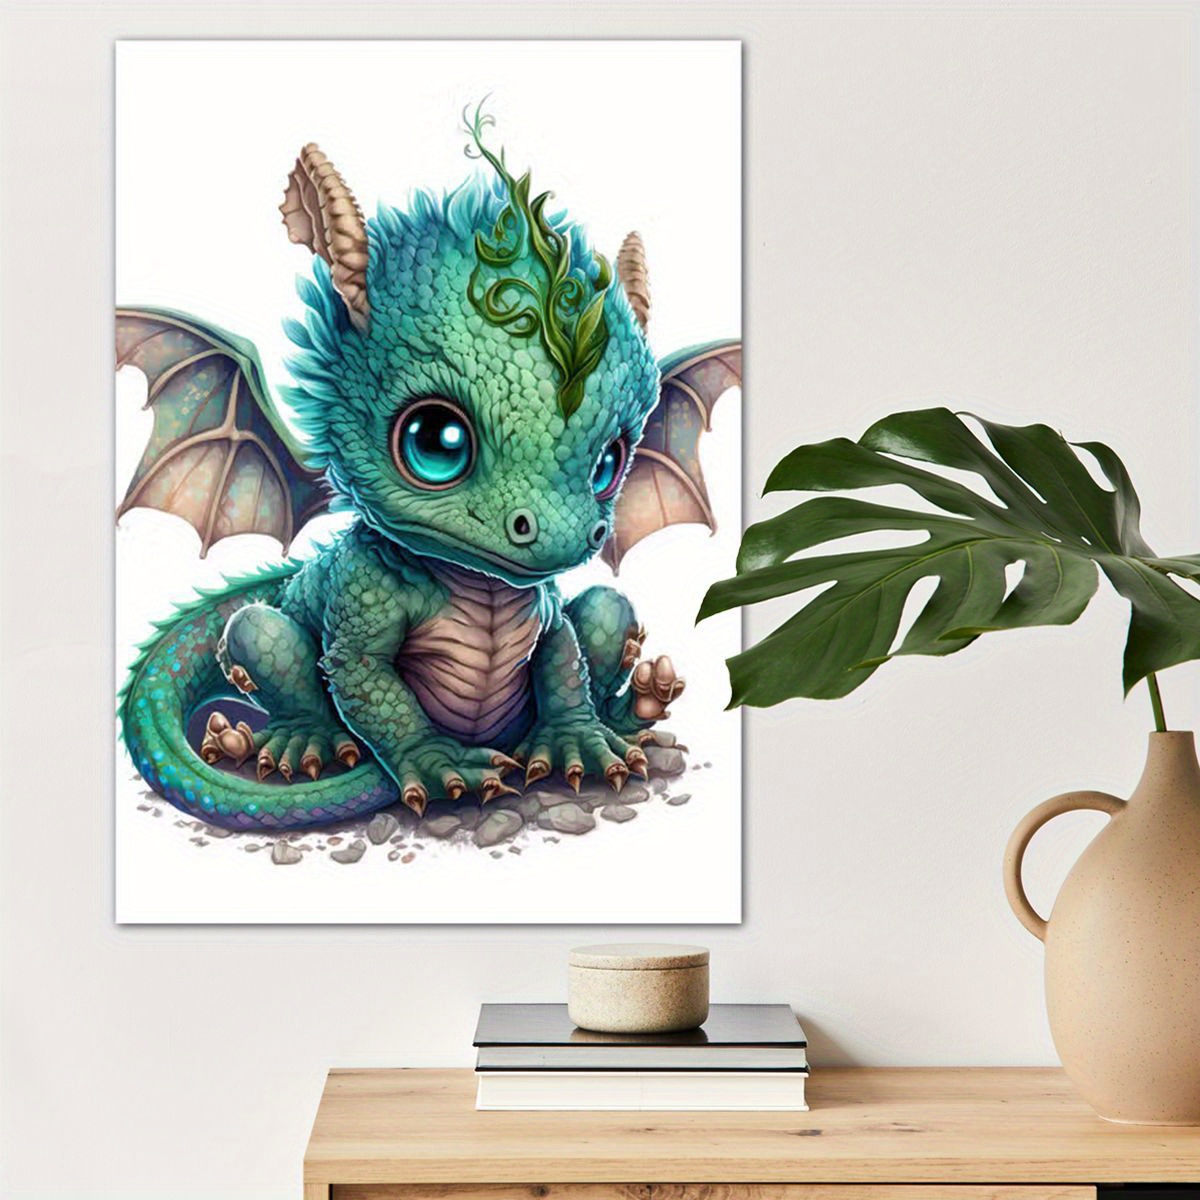 

1pc Green Dragon Baby Poster Canvas Wall Art For Home Decor, Animal Lovers Poster Wall Decor High Quality Canvas Prints For Living Room Bedroom Kitchen Office Cafe Decor, Perfect Gift And Decoration